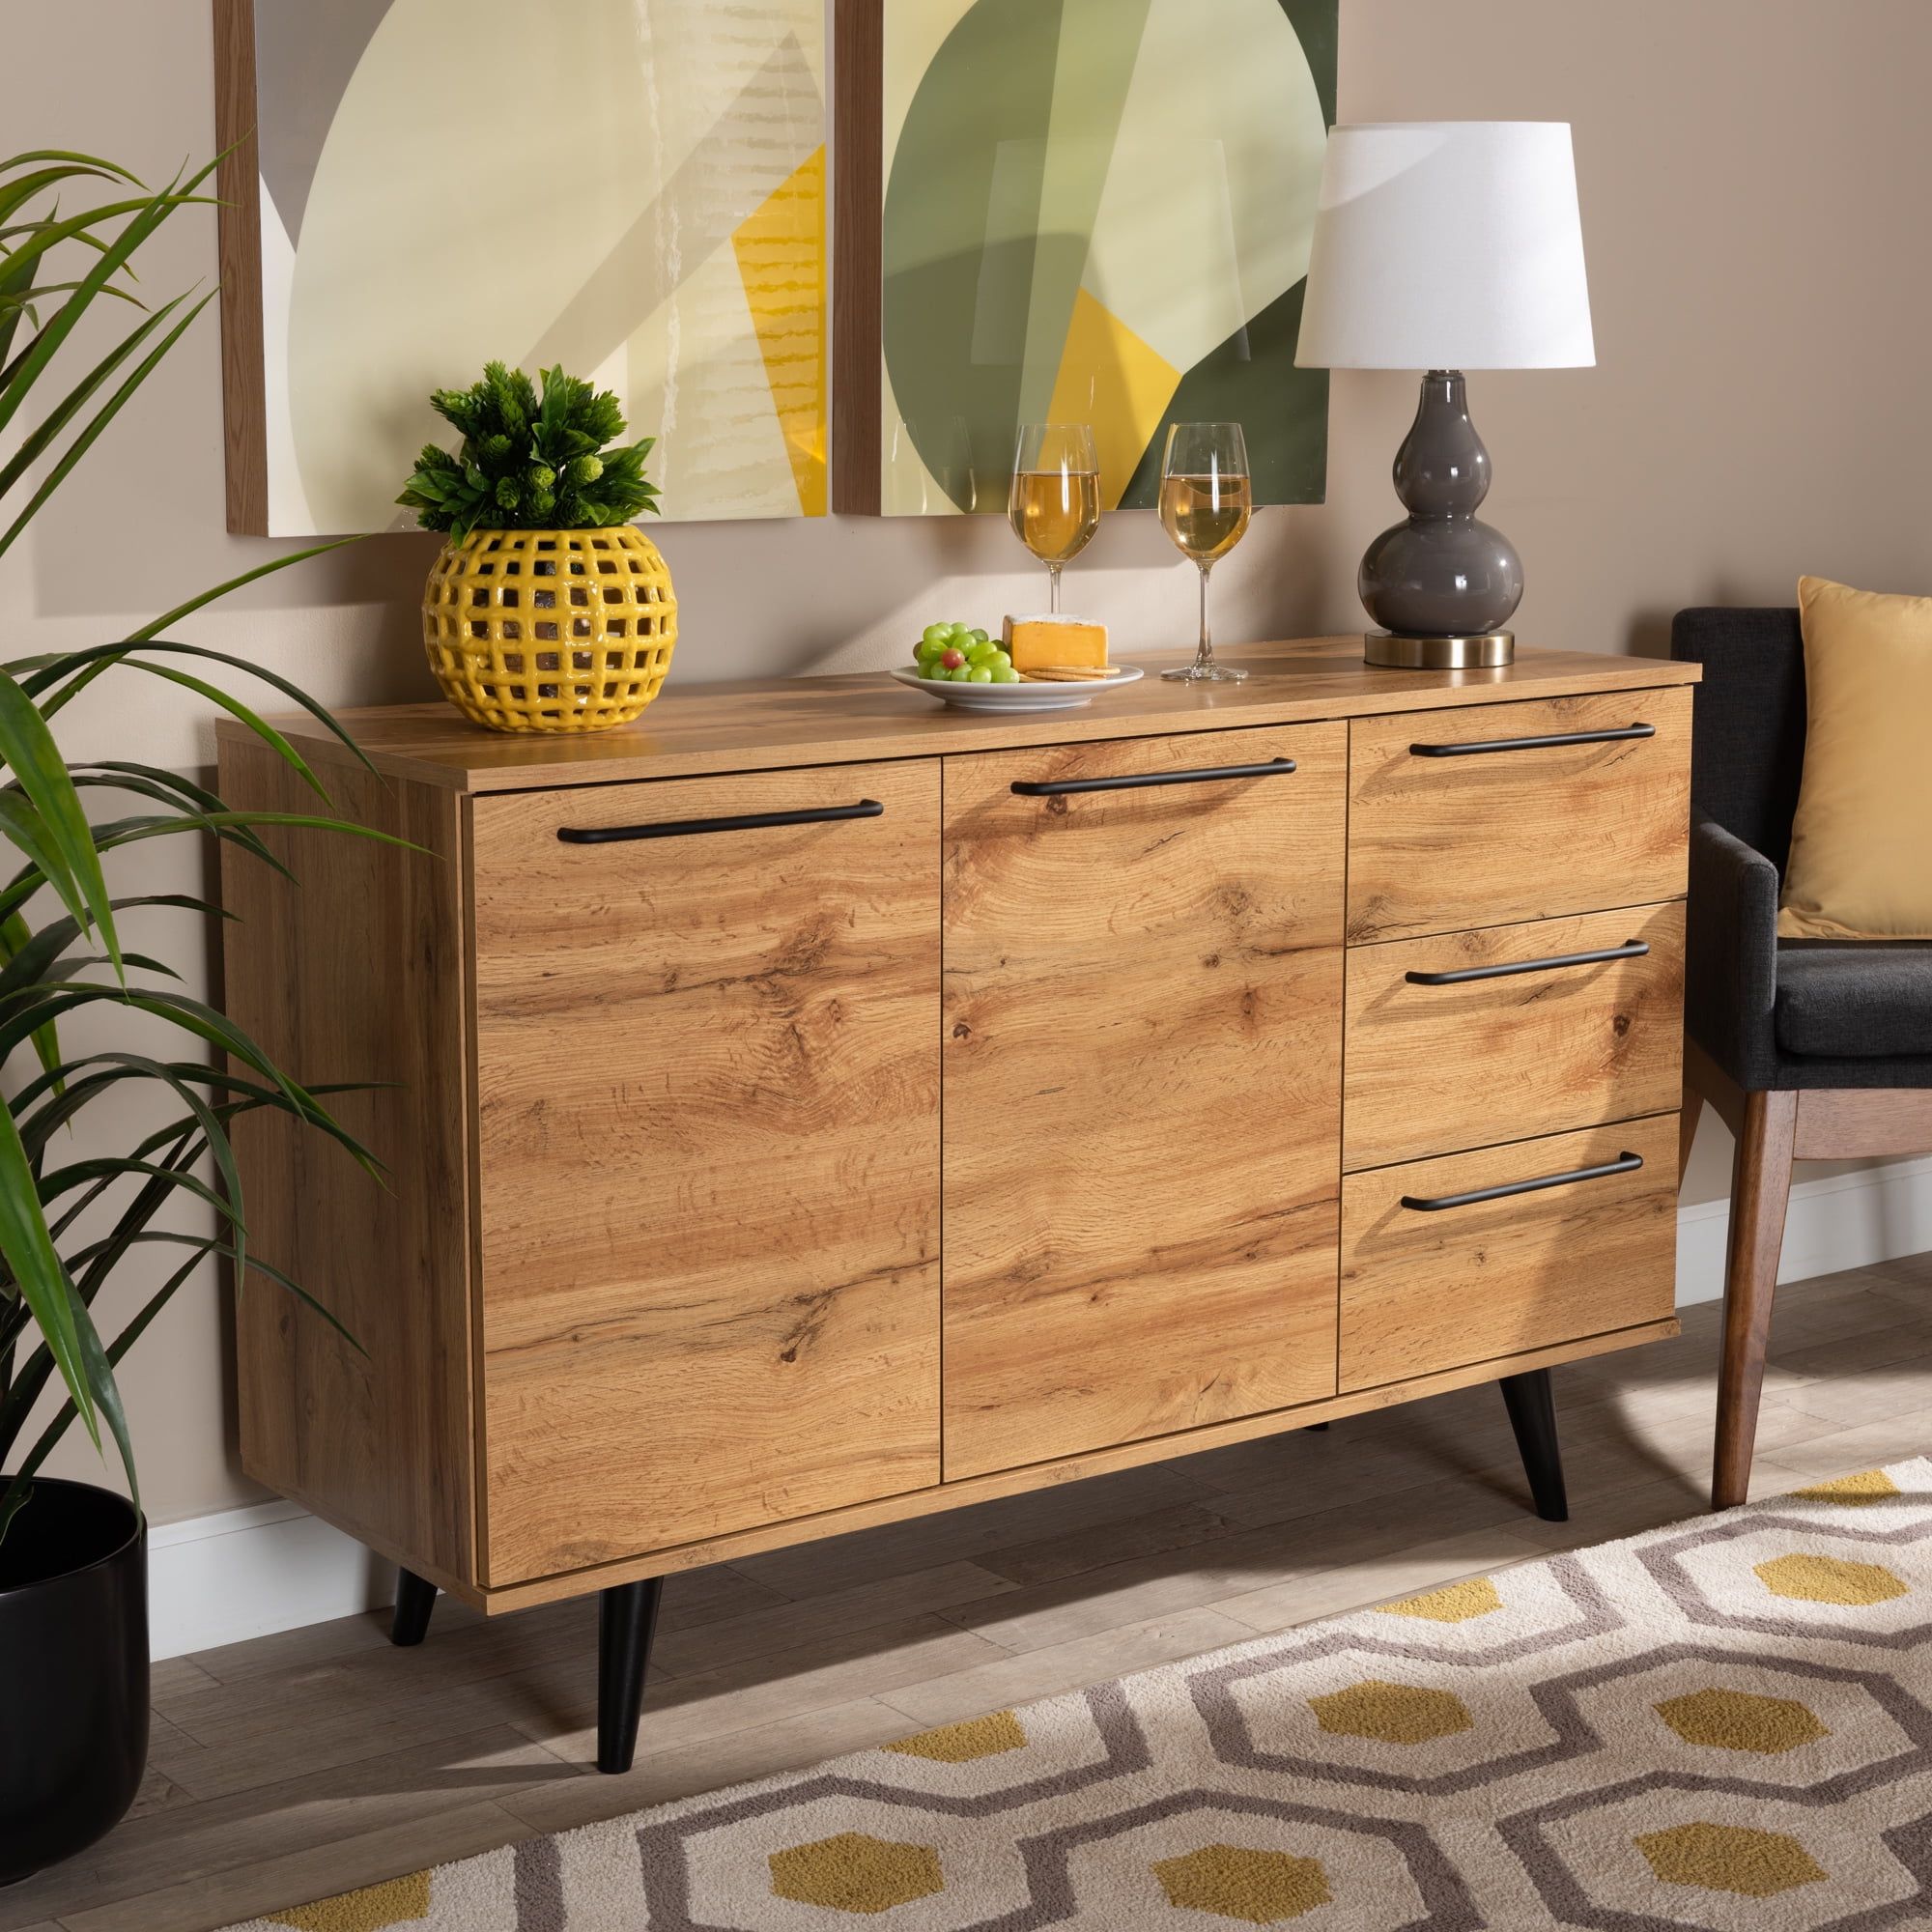 Baxton Studio Radley Modern And Contemporary Transitional Oak Brown  Finished Wood 3 Drawer Sideboard Buffet – Walmart Intended For 2017 Transitional Oak Sideboards (View 14 of 15)